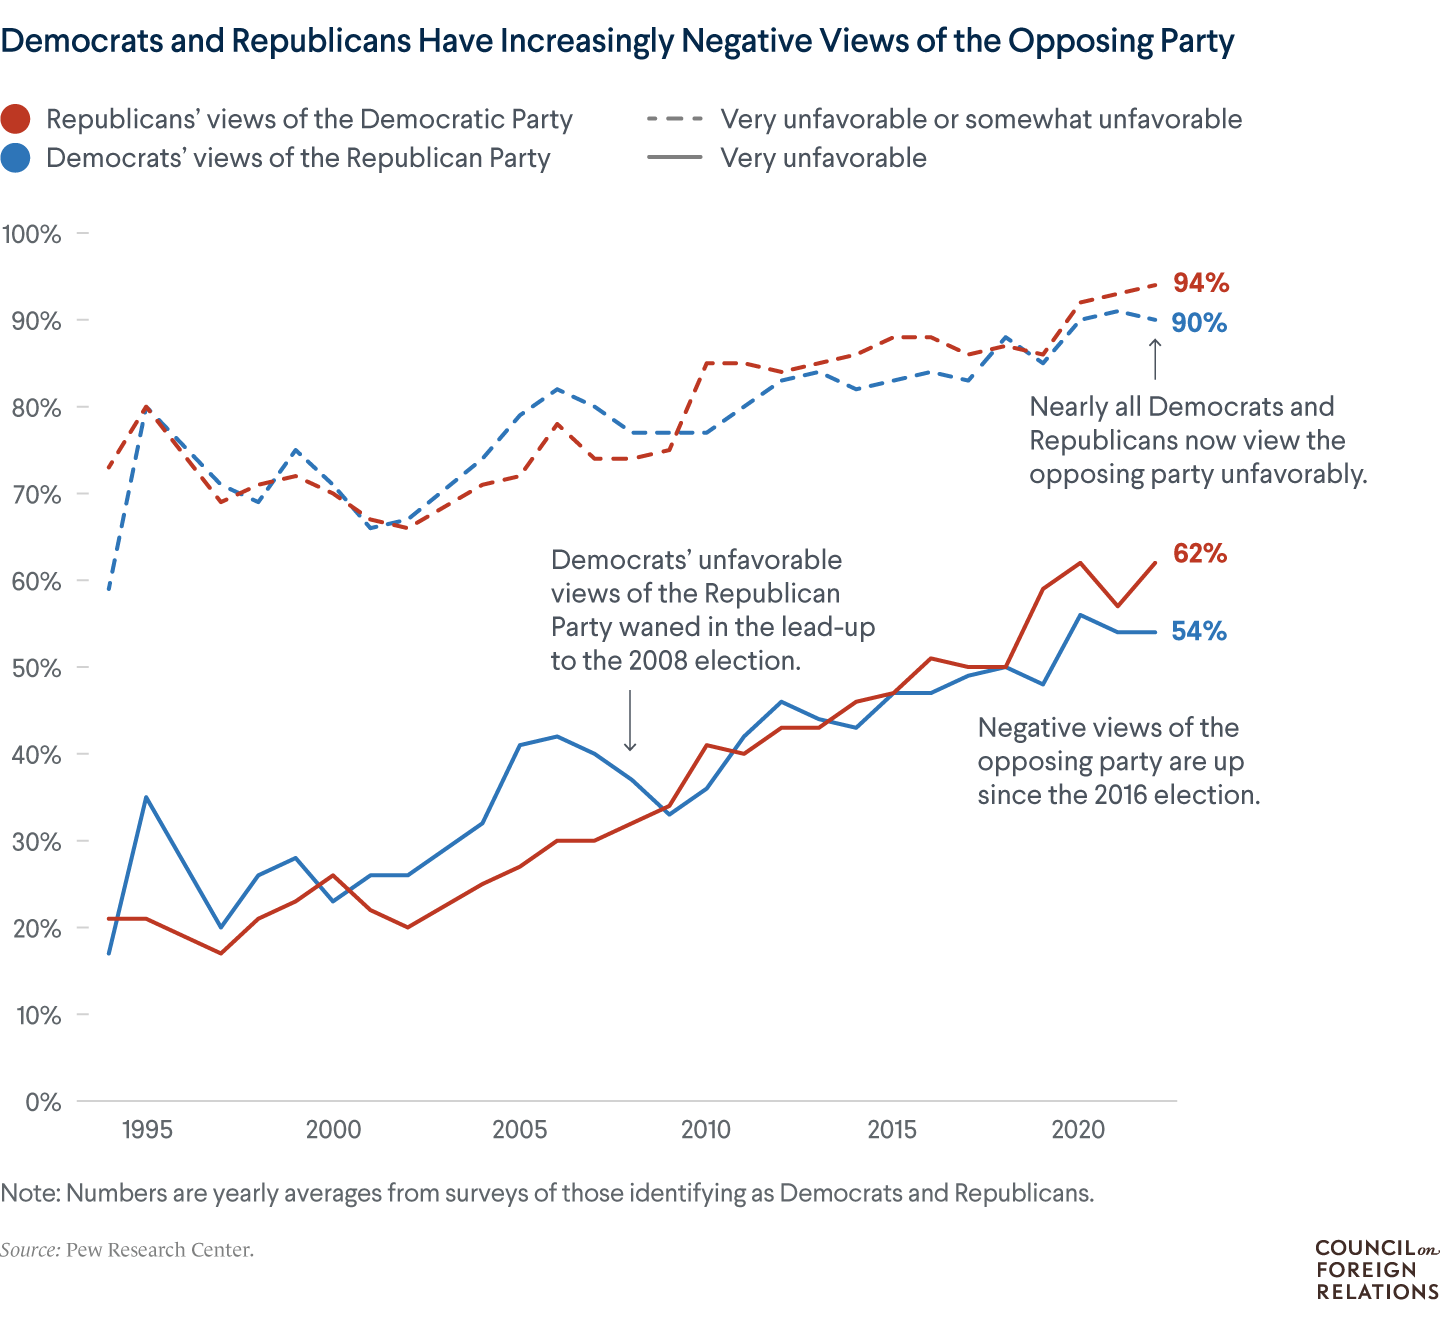 A line chart showing Democrats and Republicans having increasingly negative views of the opposing party over the past three decades.